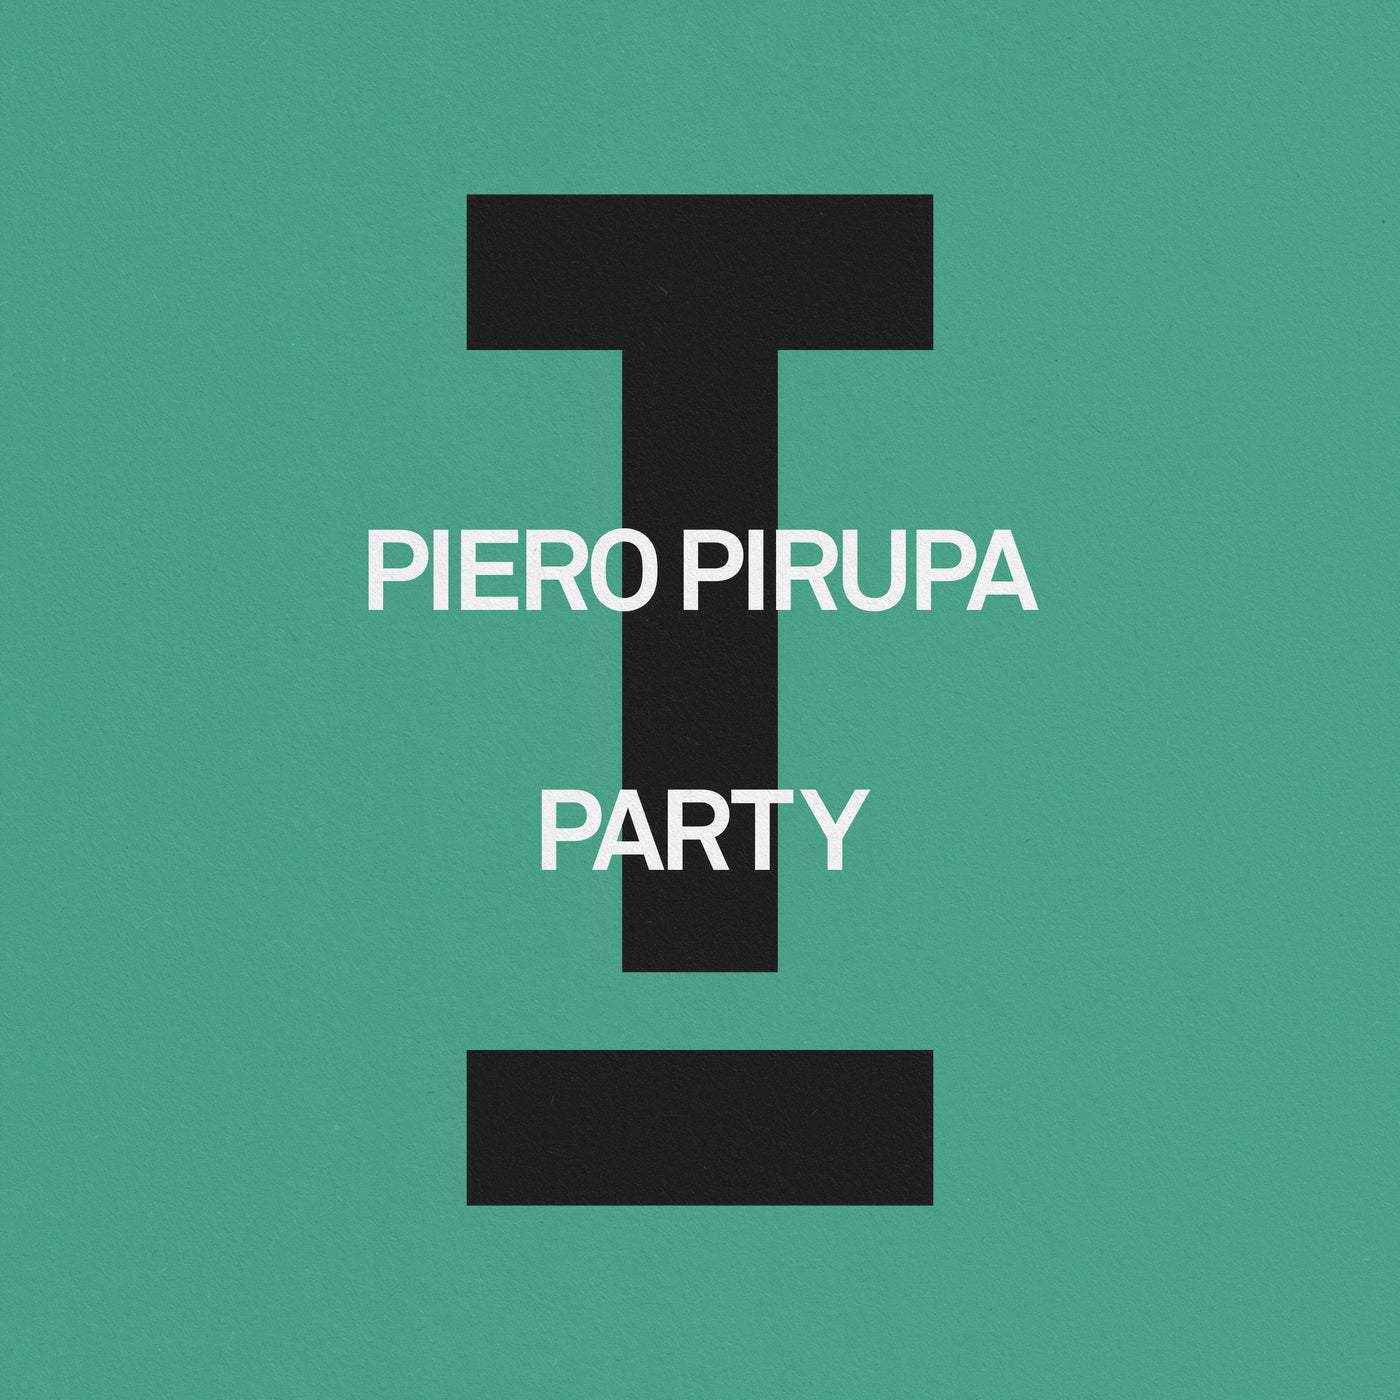 image cover: Party by Piero Pirupa on Toolroom